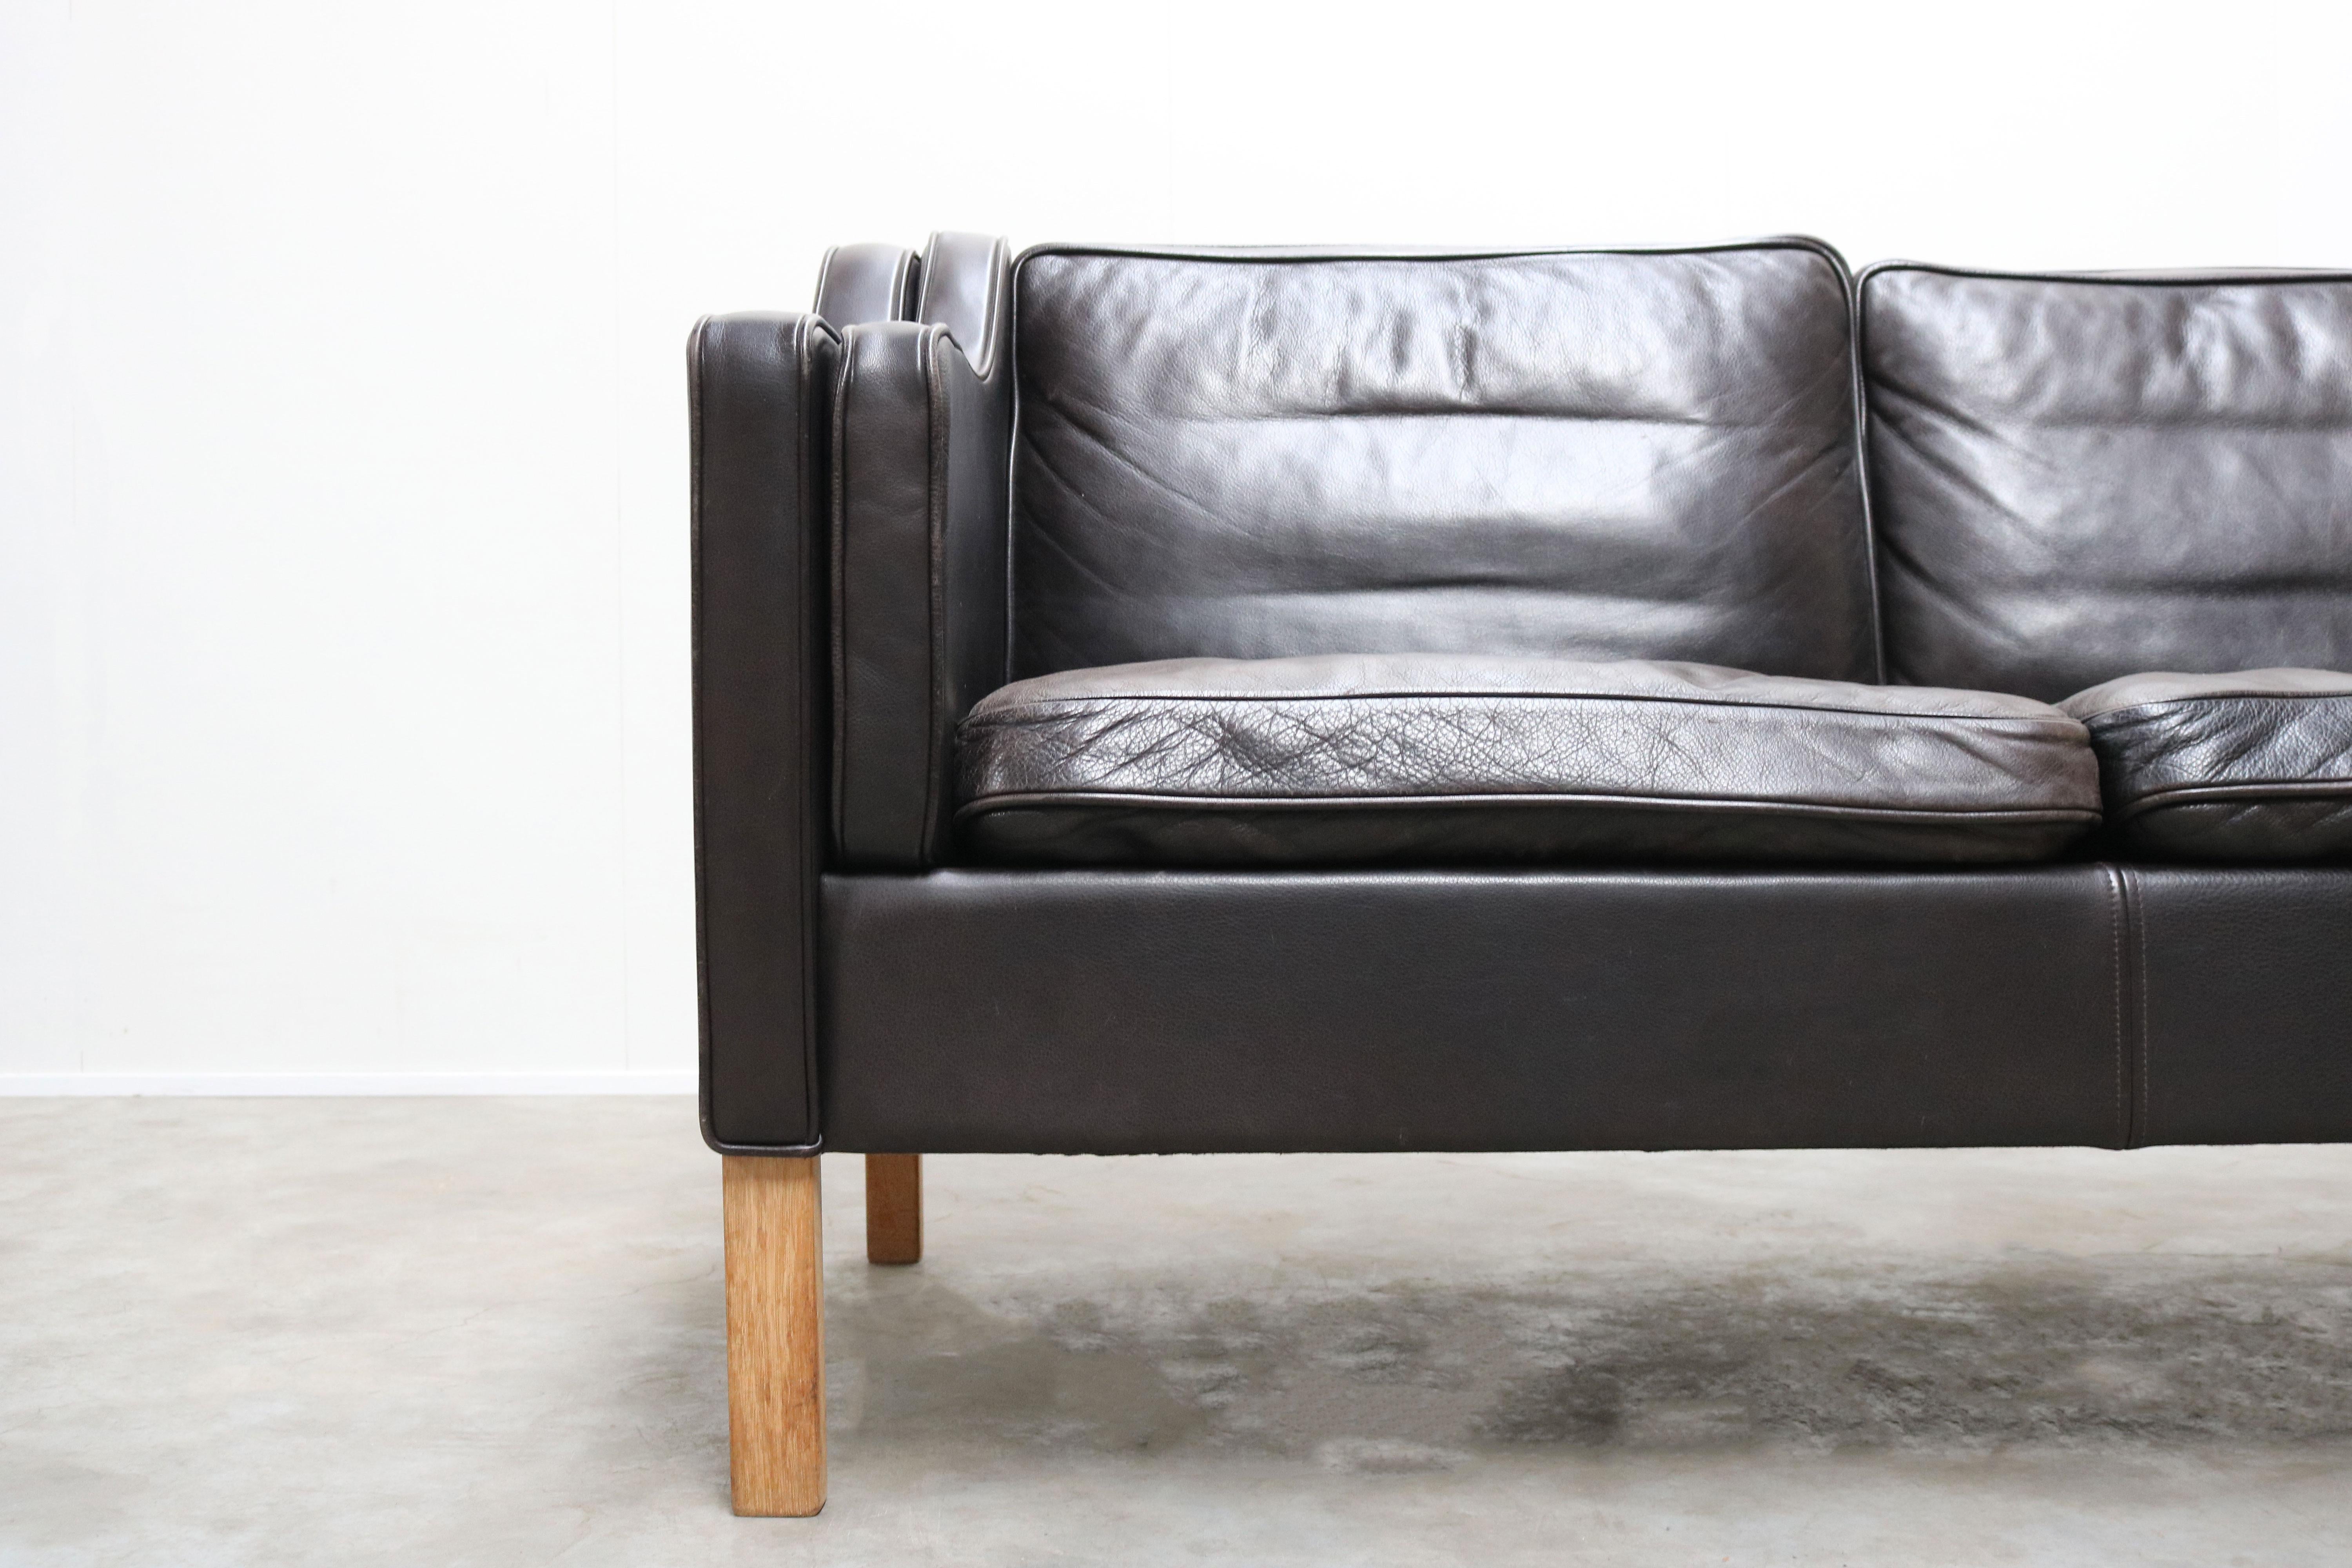 Danish Vintage Black Leather Sofa 2213 by Børge Mogensen for Fredericia 1960 Three-Seat